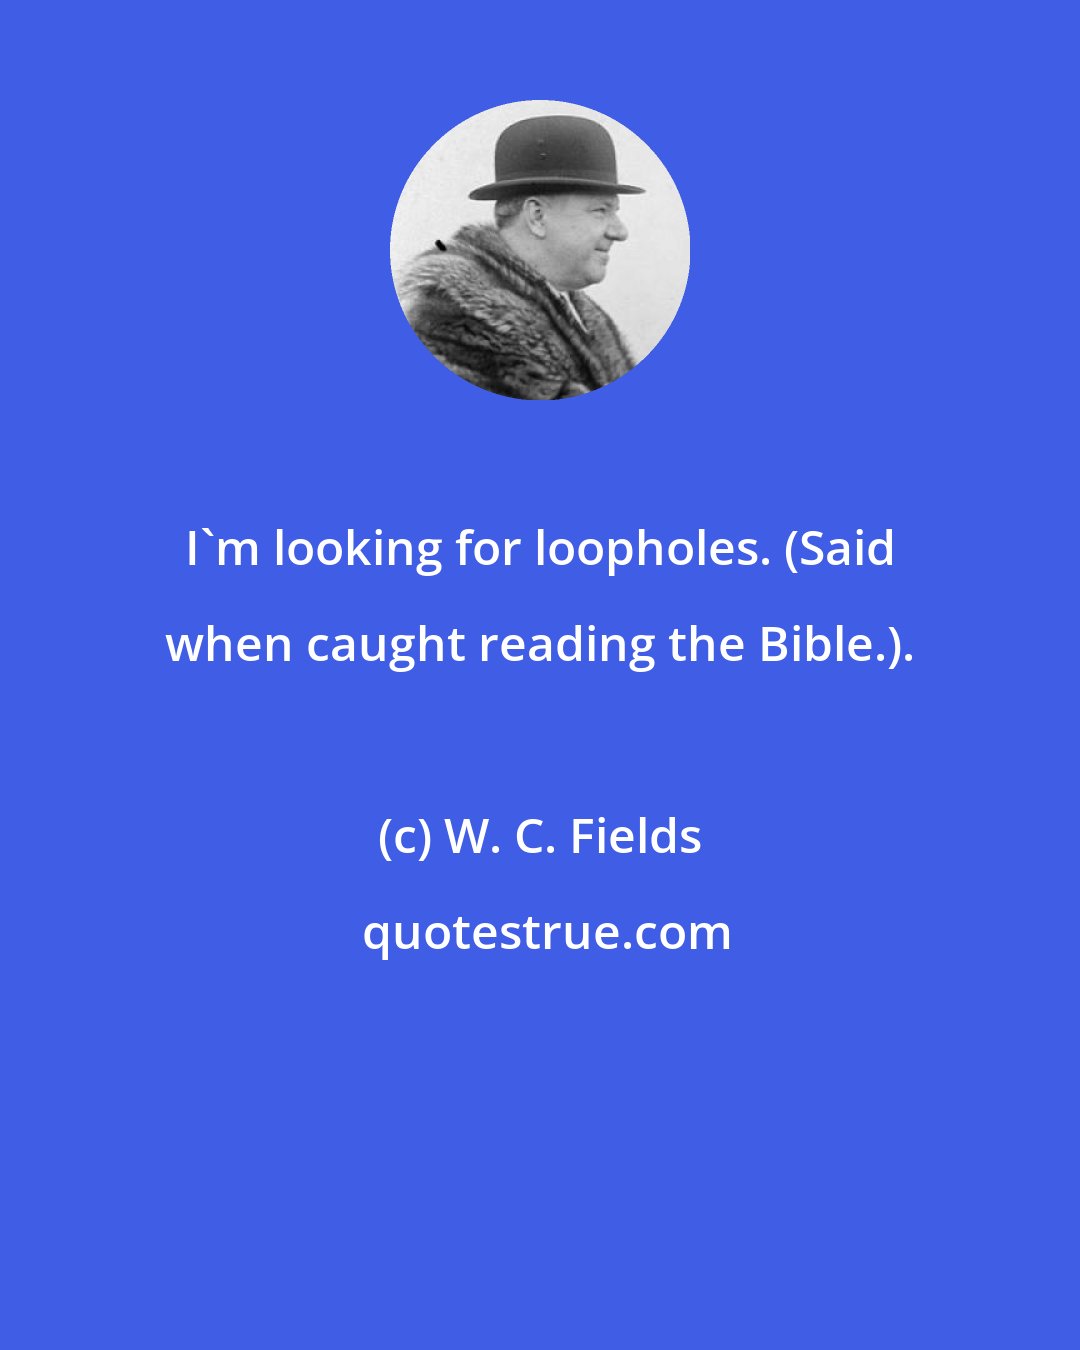 W. C. Fields: I'm looking for loopholes. (Said when caught reading the Bible.).